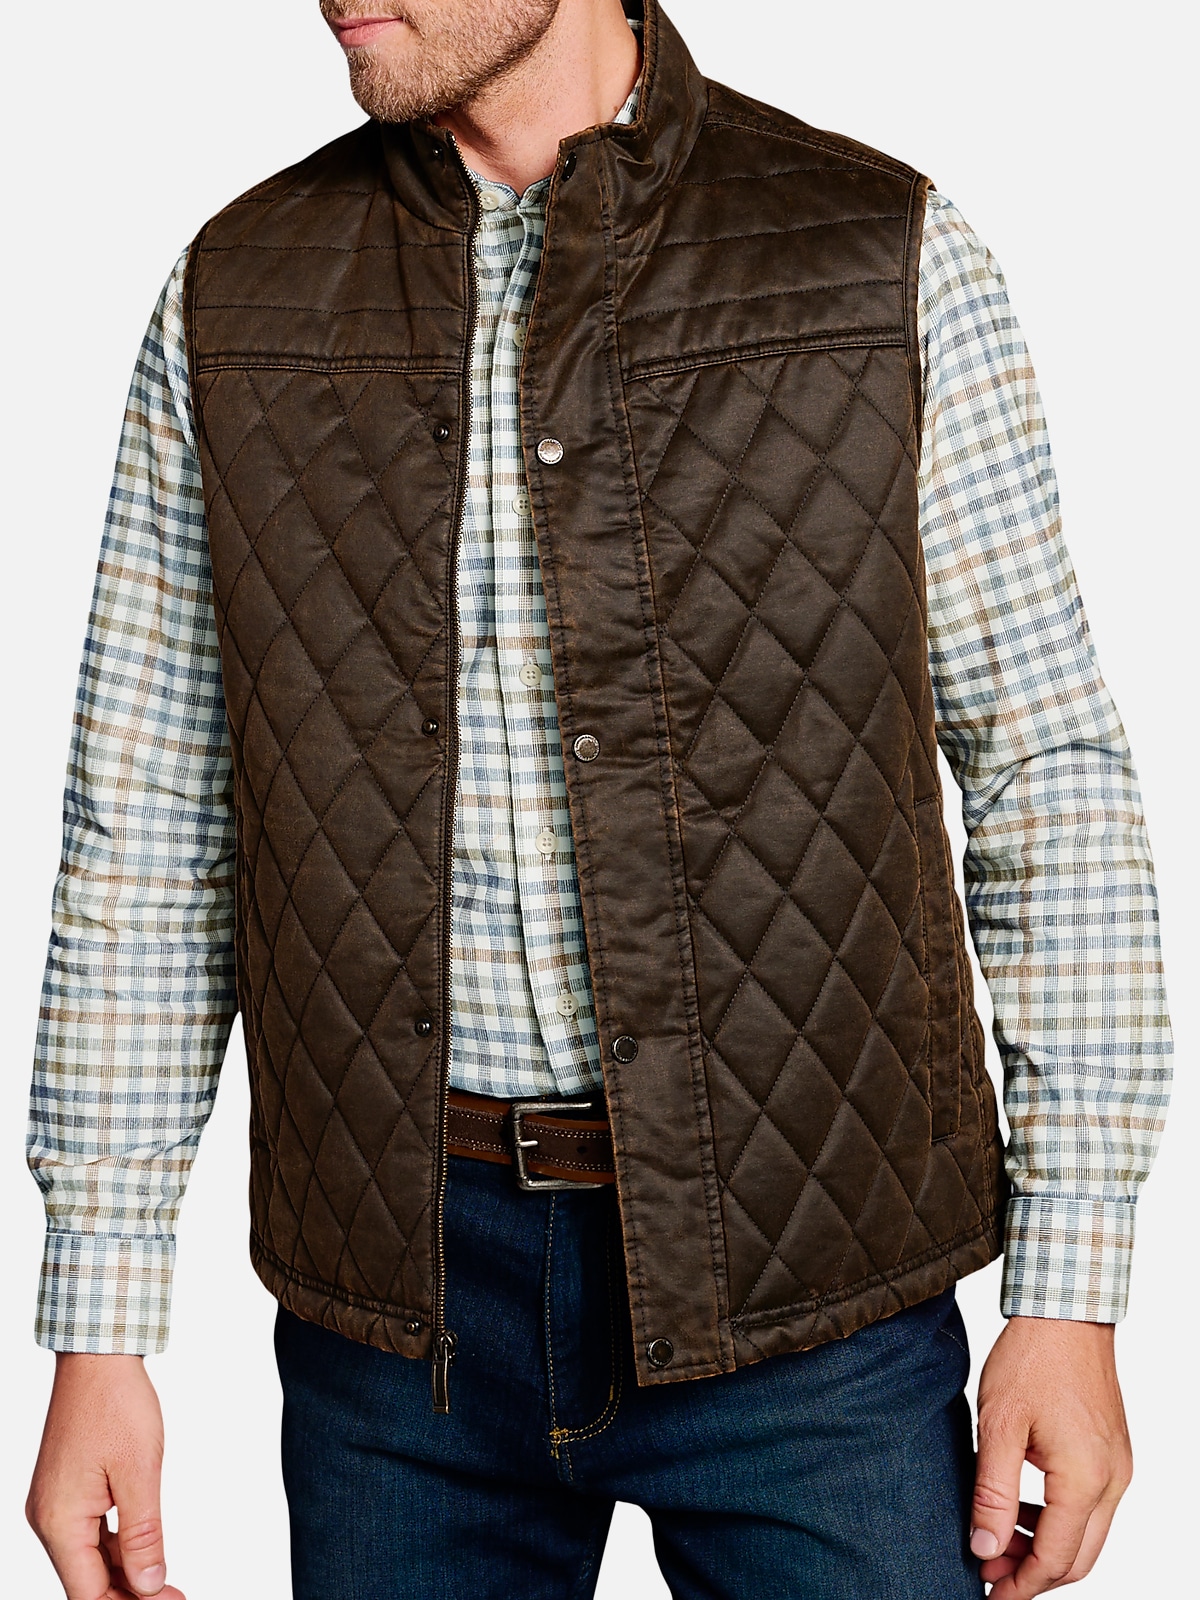 Johnston & Murphy Modern Fit Quilted Vest | All Sale| Men's Wearhouse